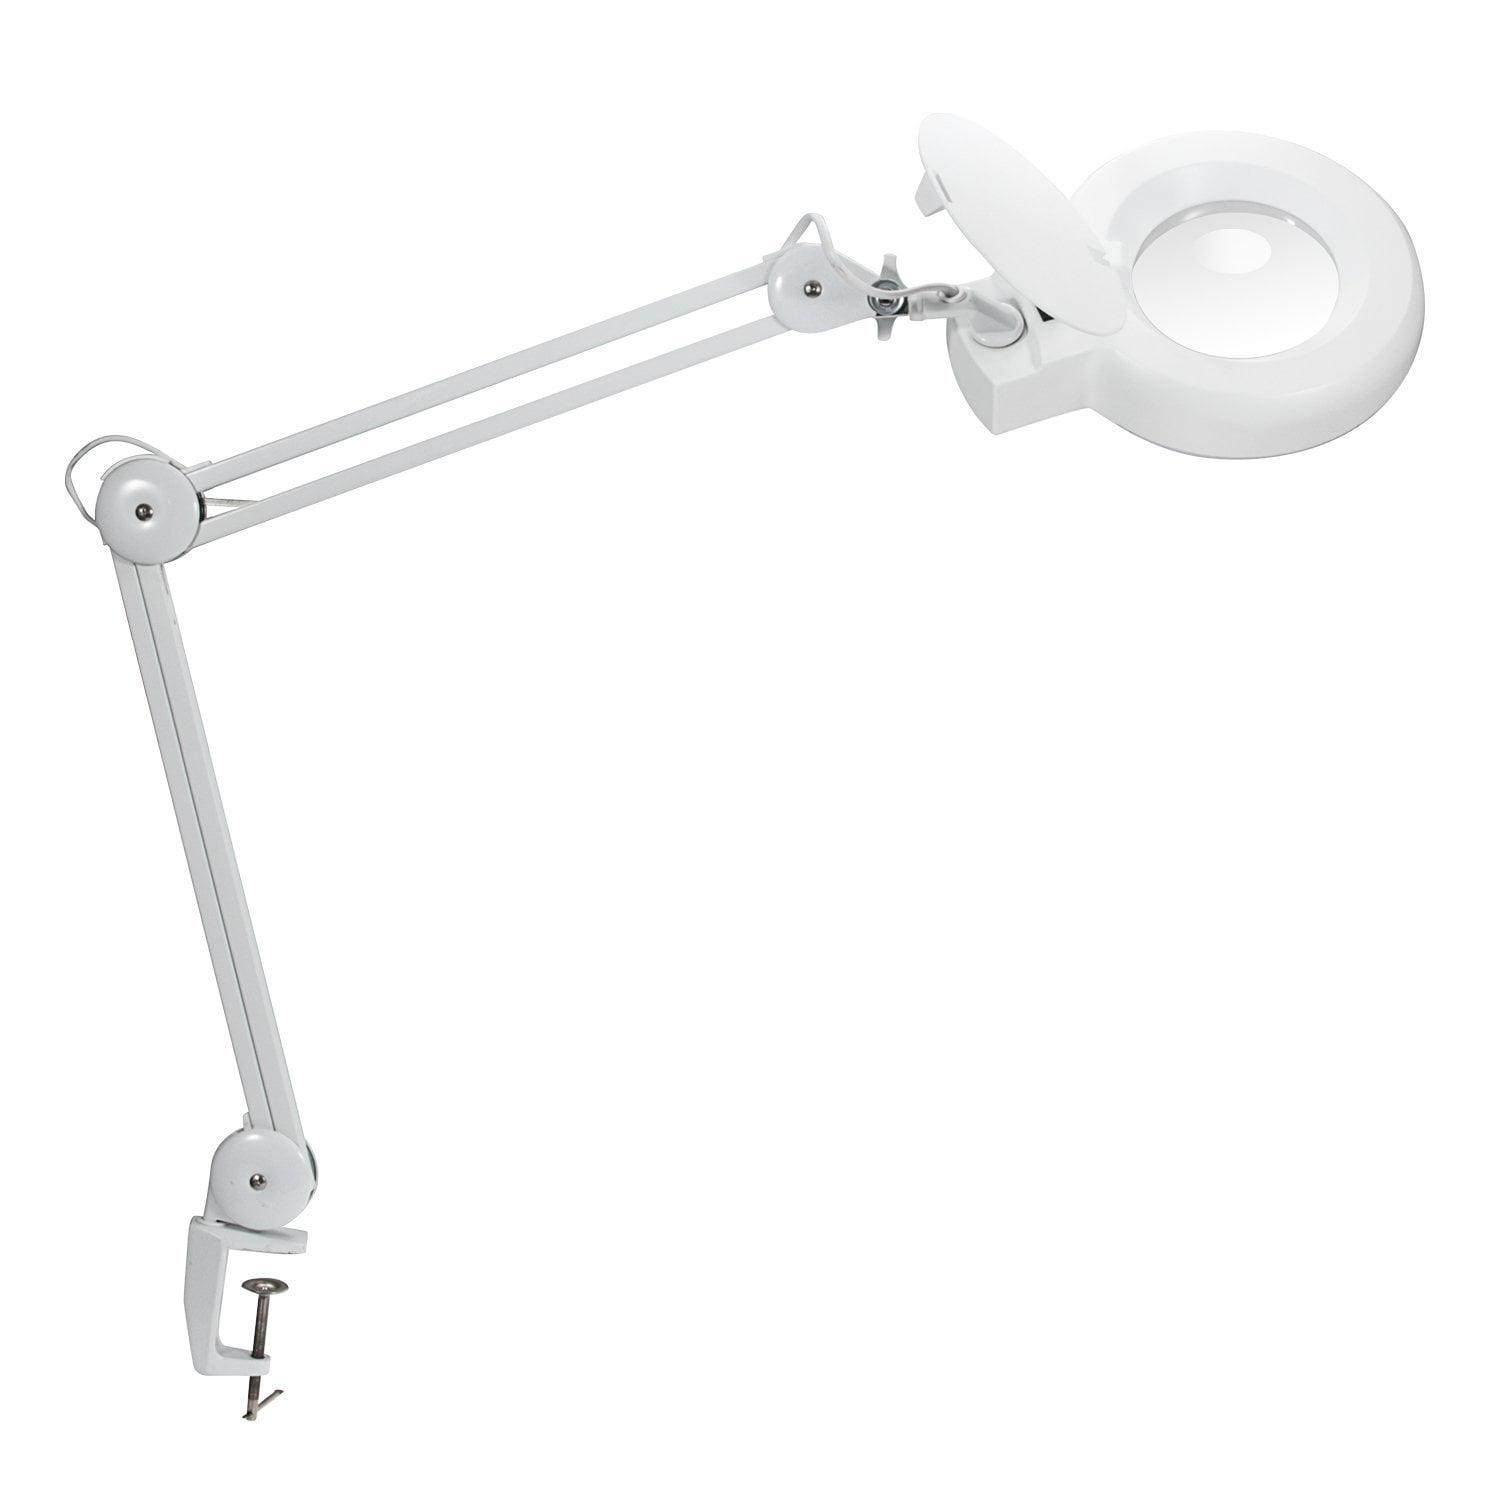 OxyLED LED Magnifying Lamp Desktop Magnifier Lamp with Ultra-Efficient  Daylight Desk Clamp LED Spring-Arm Magnifier Lamp